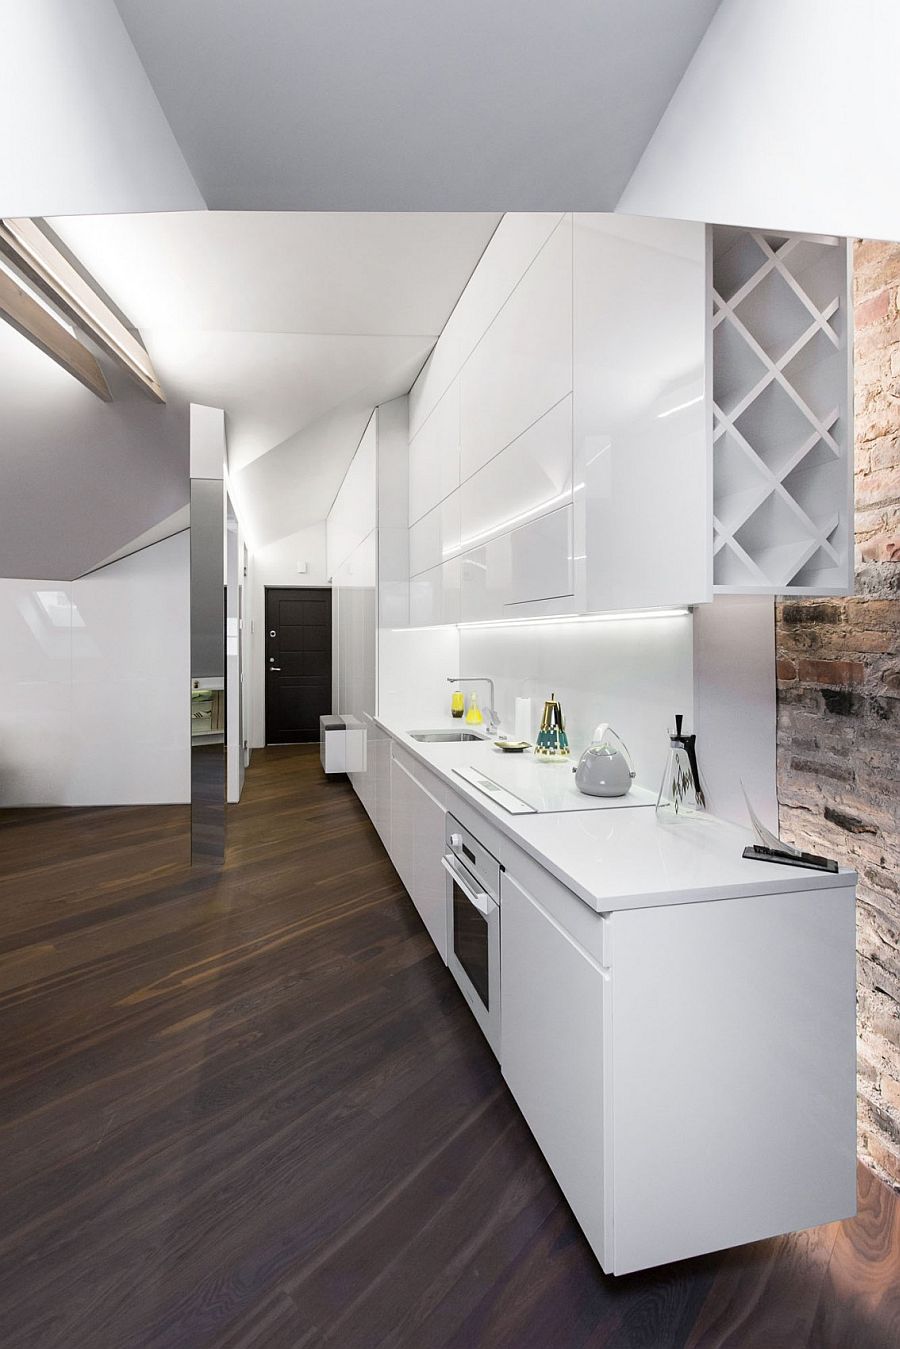 Sleek kitchen workdstation in white makes smart use of space